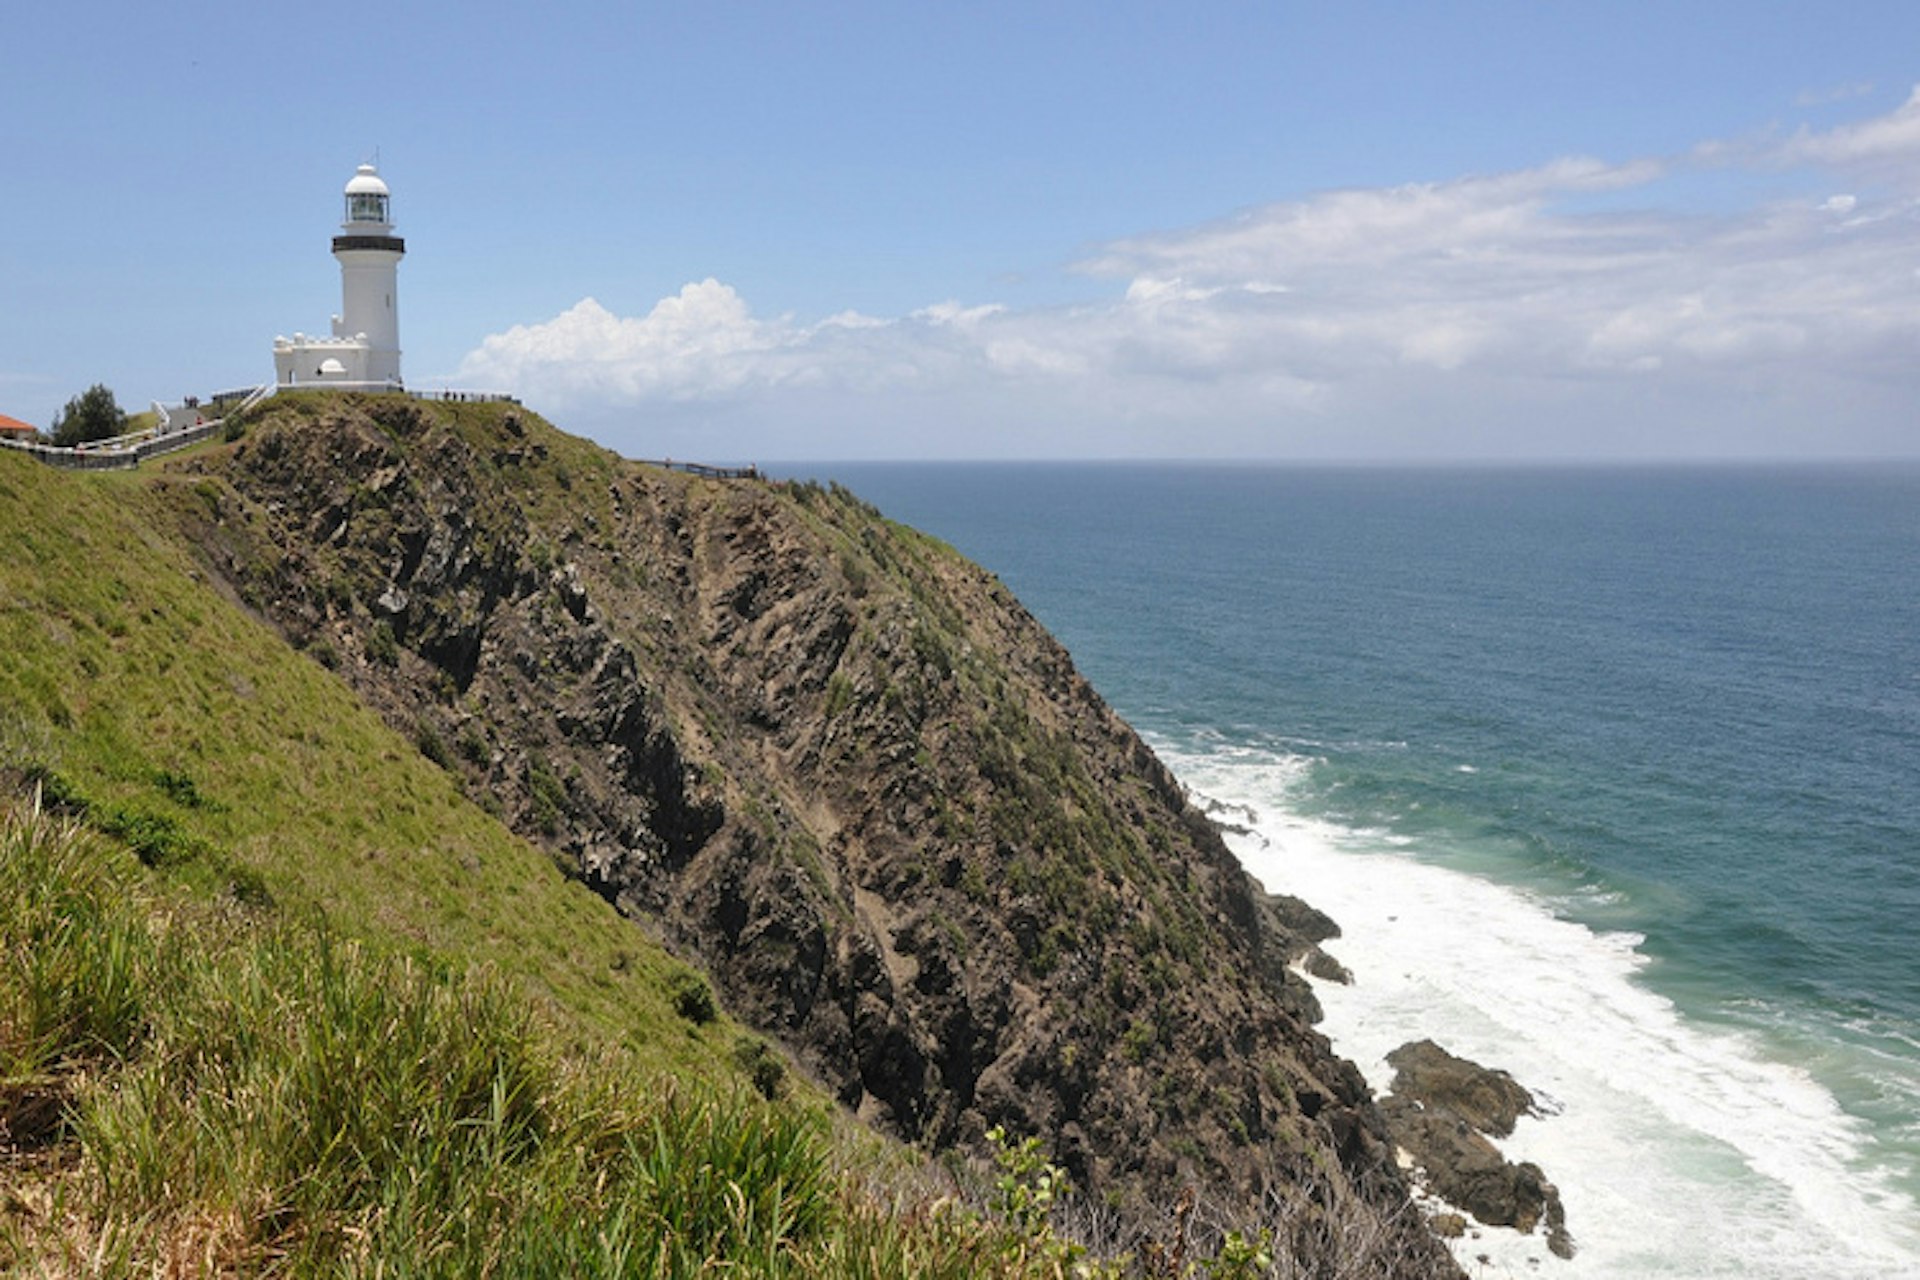 Byron Bay's lighthouse / Image by garyt70 / CC BY 2.0